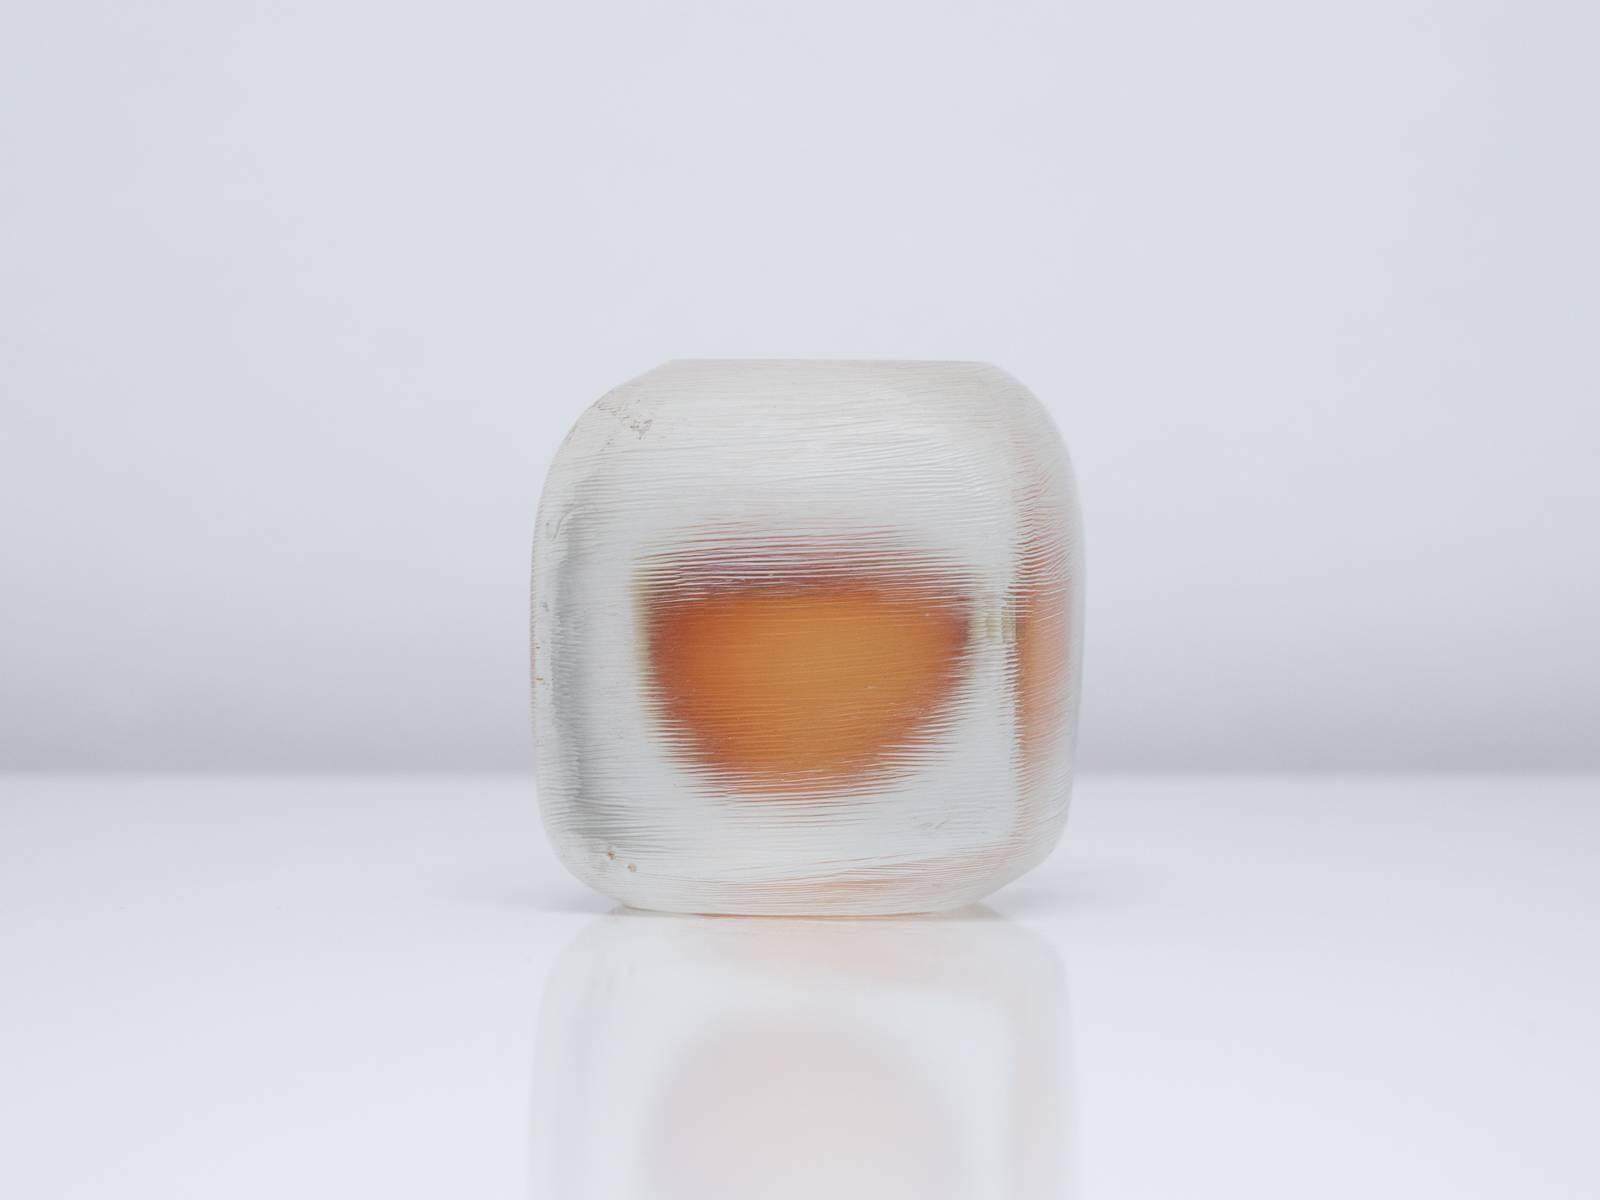 A small, polished cuboid Murano glass paperweight produced by Venini in the vetro Sommerso incisco or 